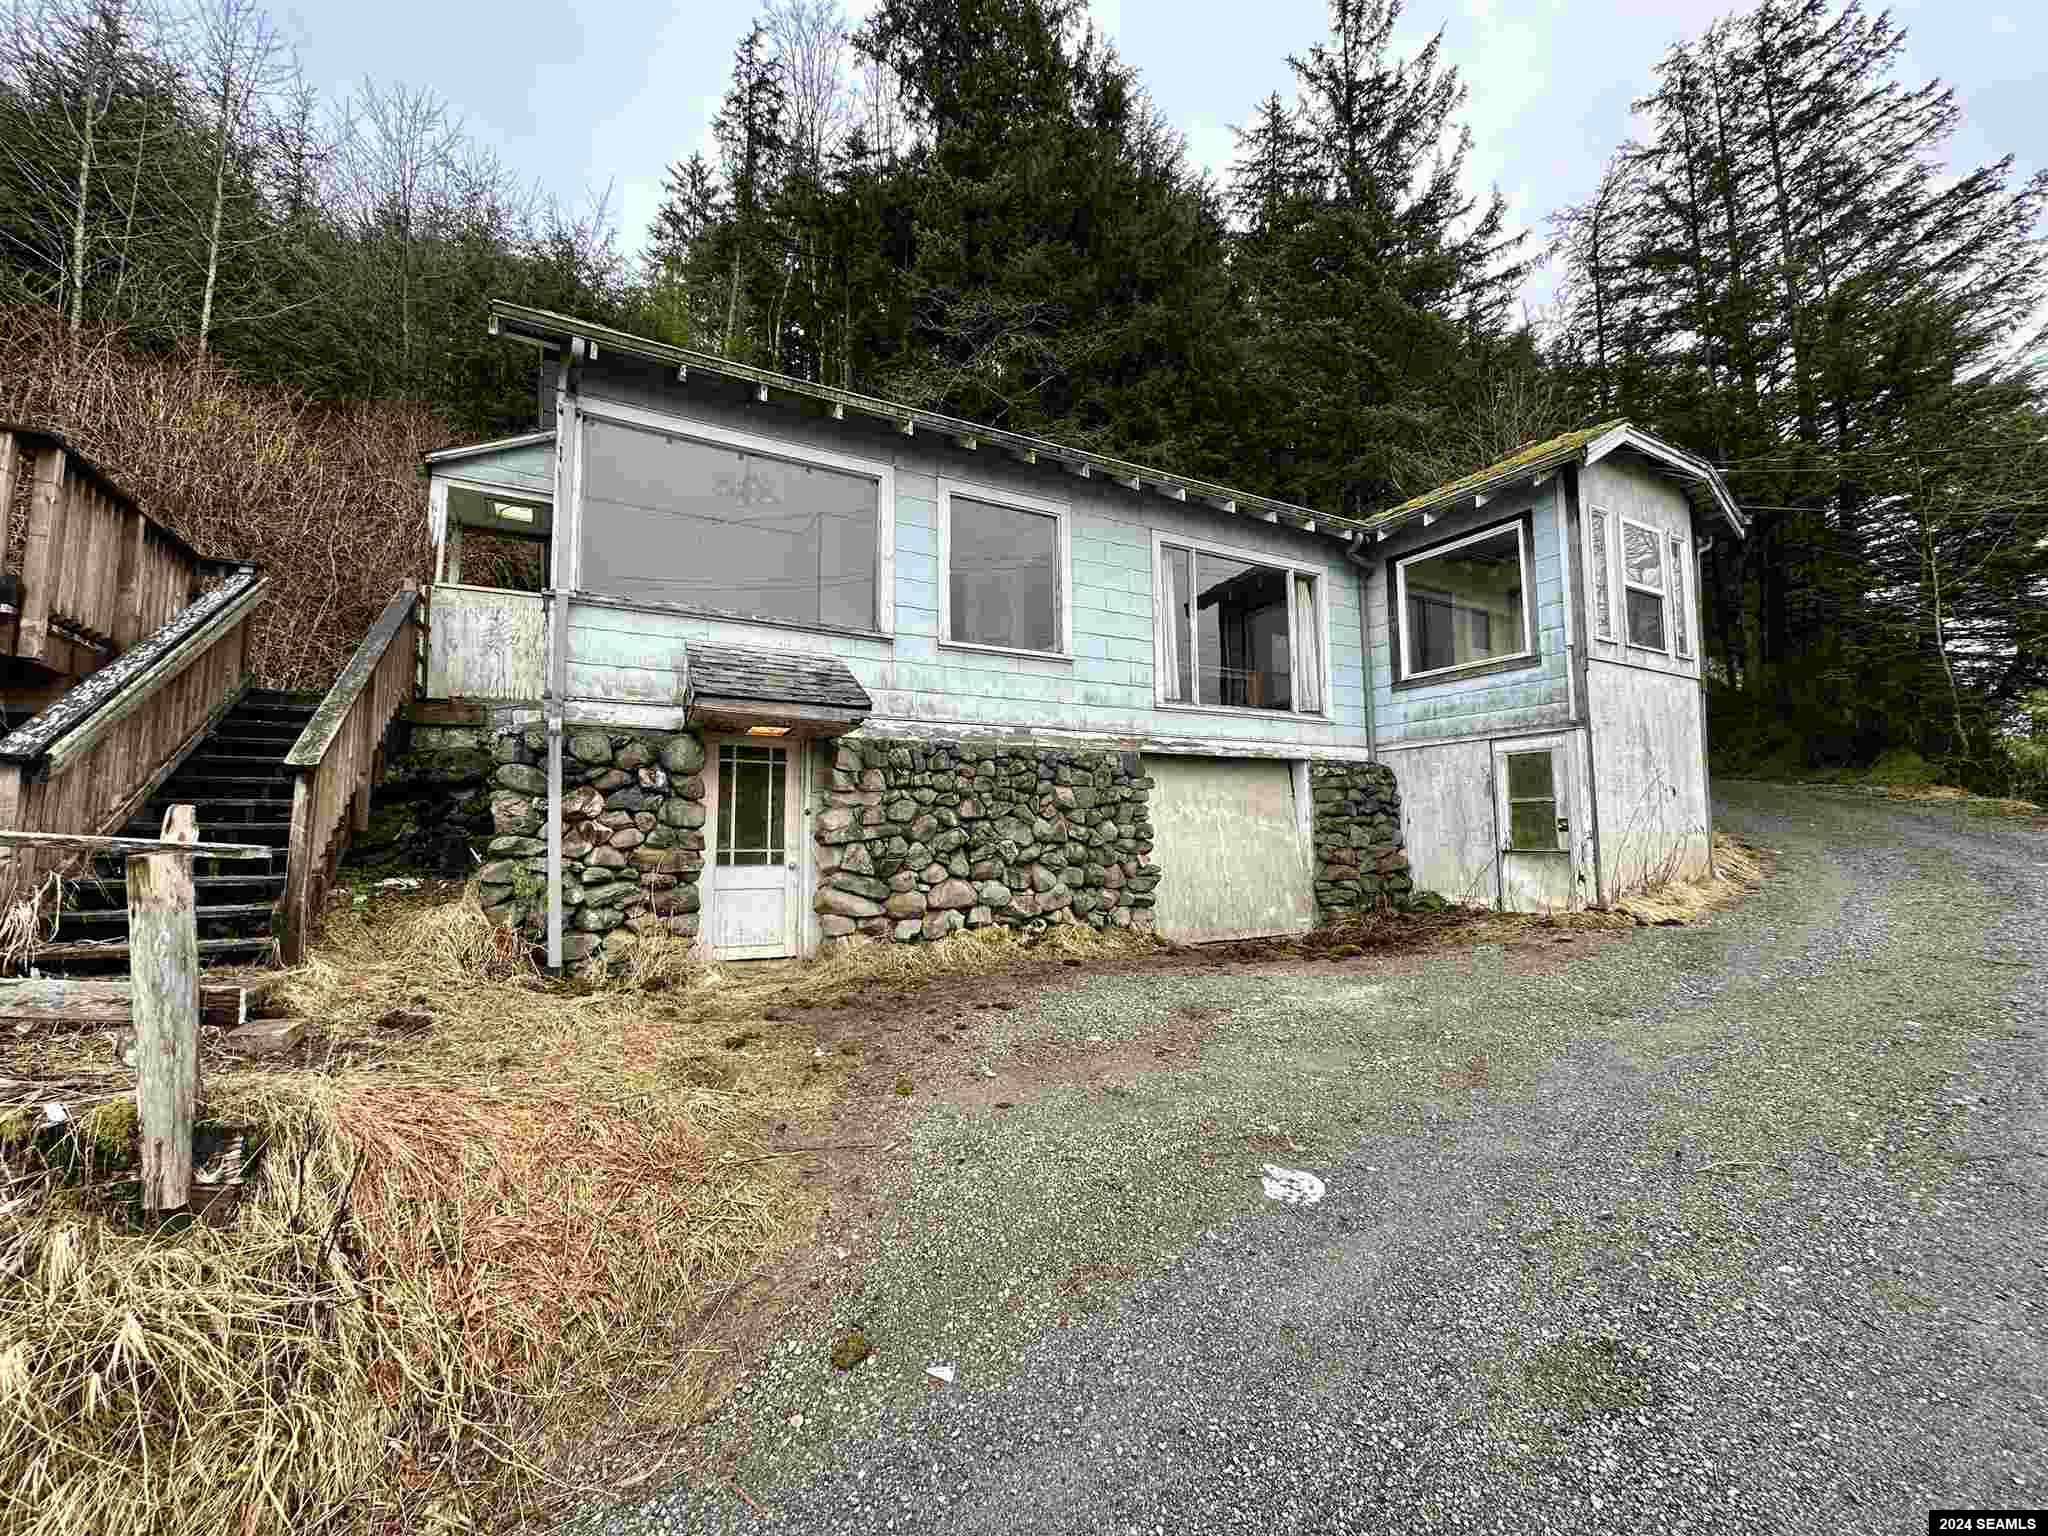 4616 Tongass Hwy., Ketchikan, AK 99901, 2 Bedrooms Bedrooms, ,1 BathroomBathrooms,Residential,For Sale,Tongass Hwy.,24099